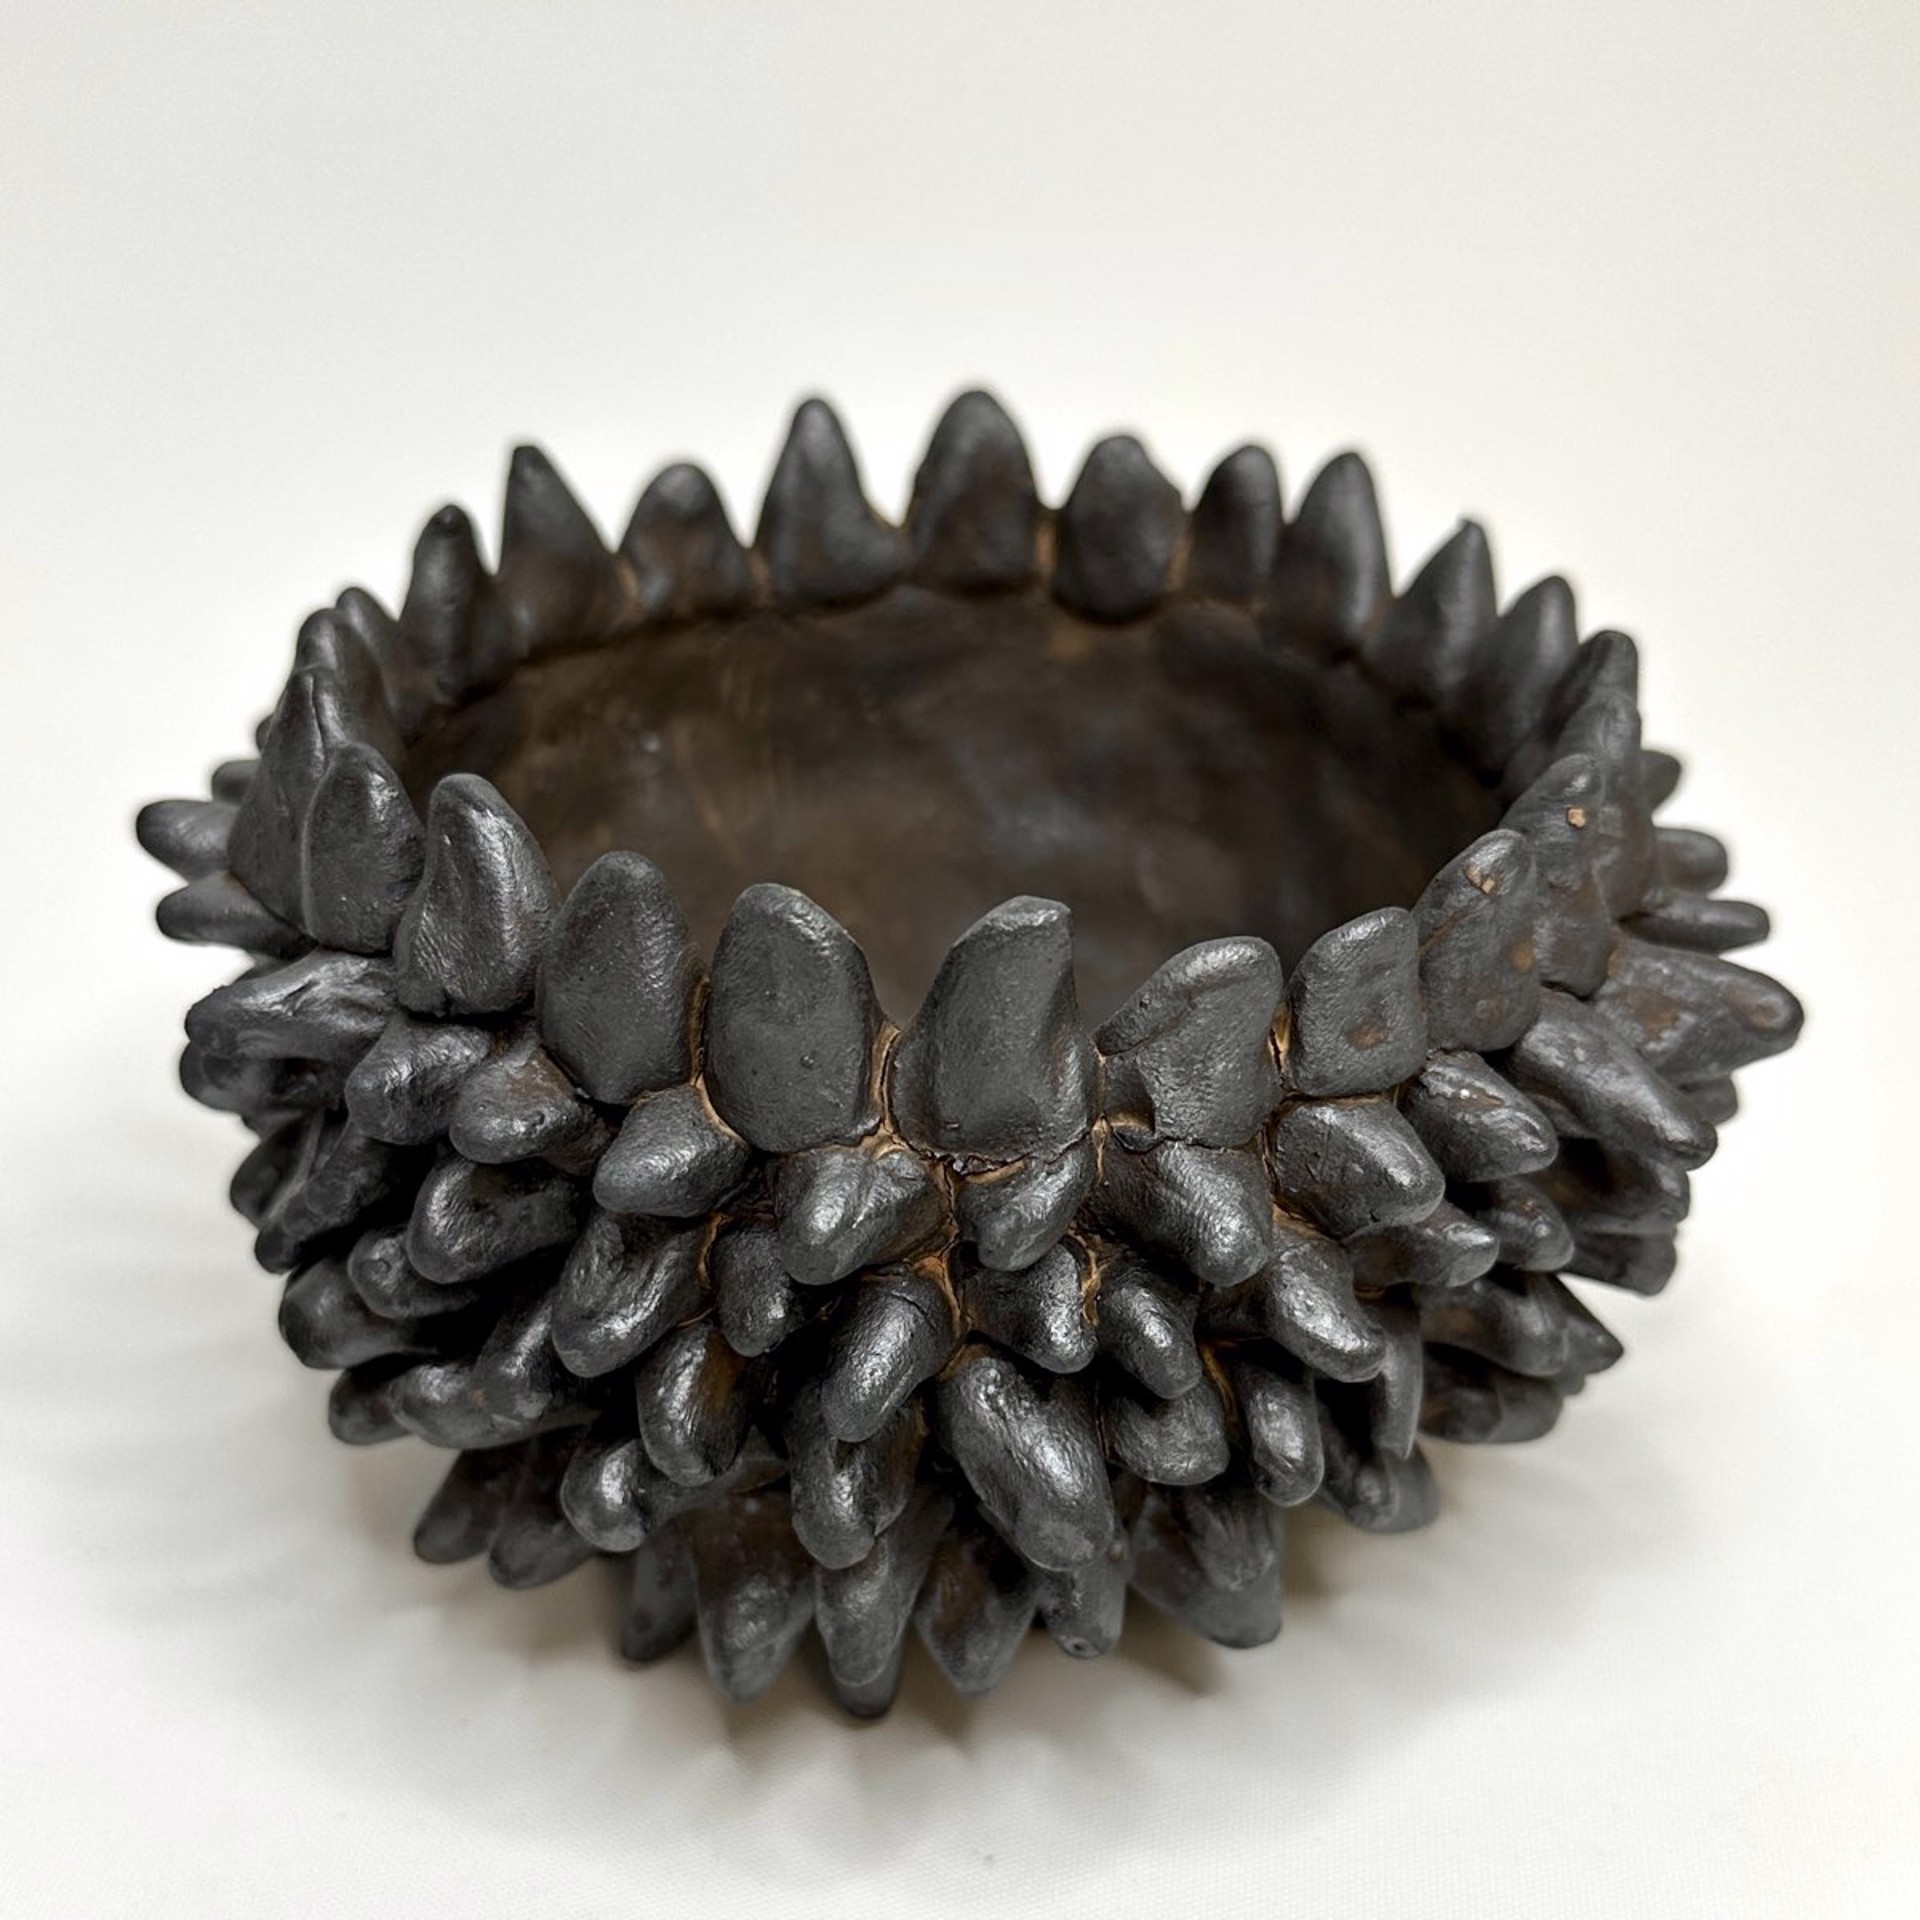 Soda Fired Spiked Planter 1 by Darshana Patel